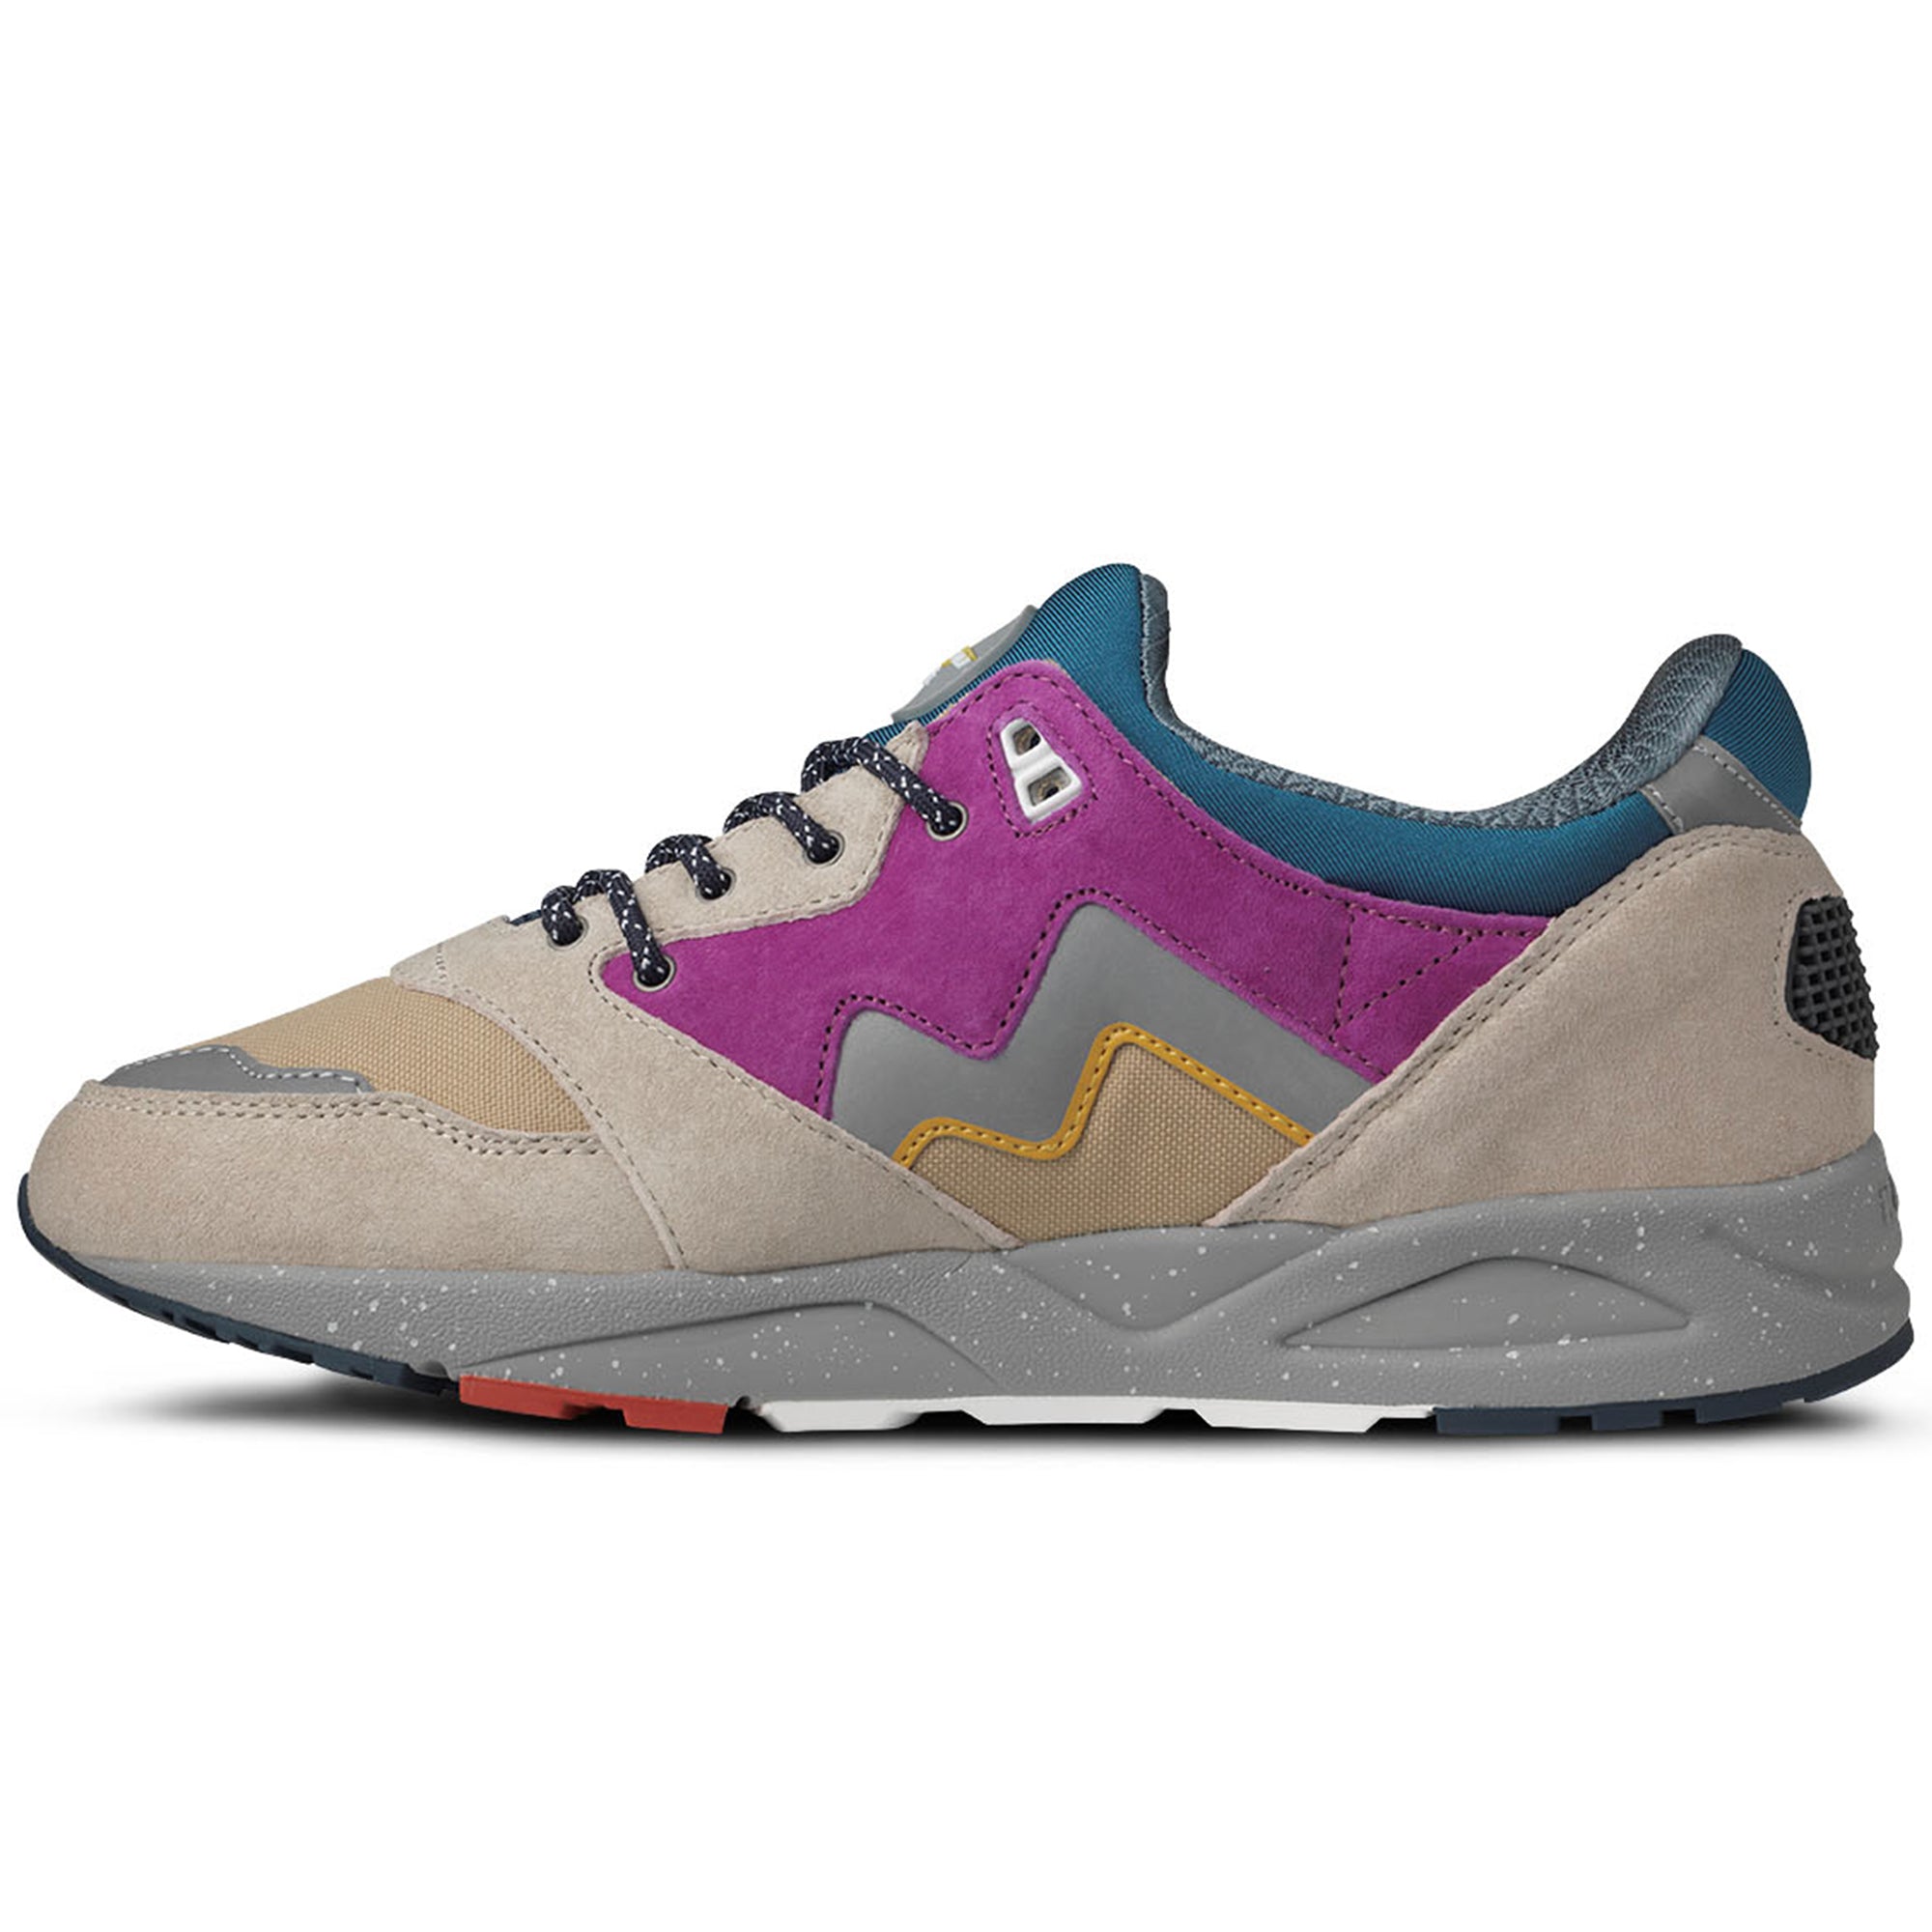 Karhu Aria 95 Trainers - Silver Lining / Mulberry